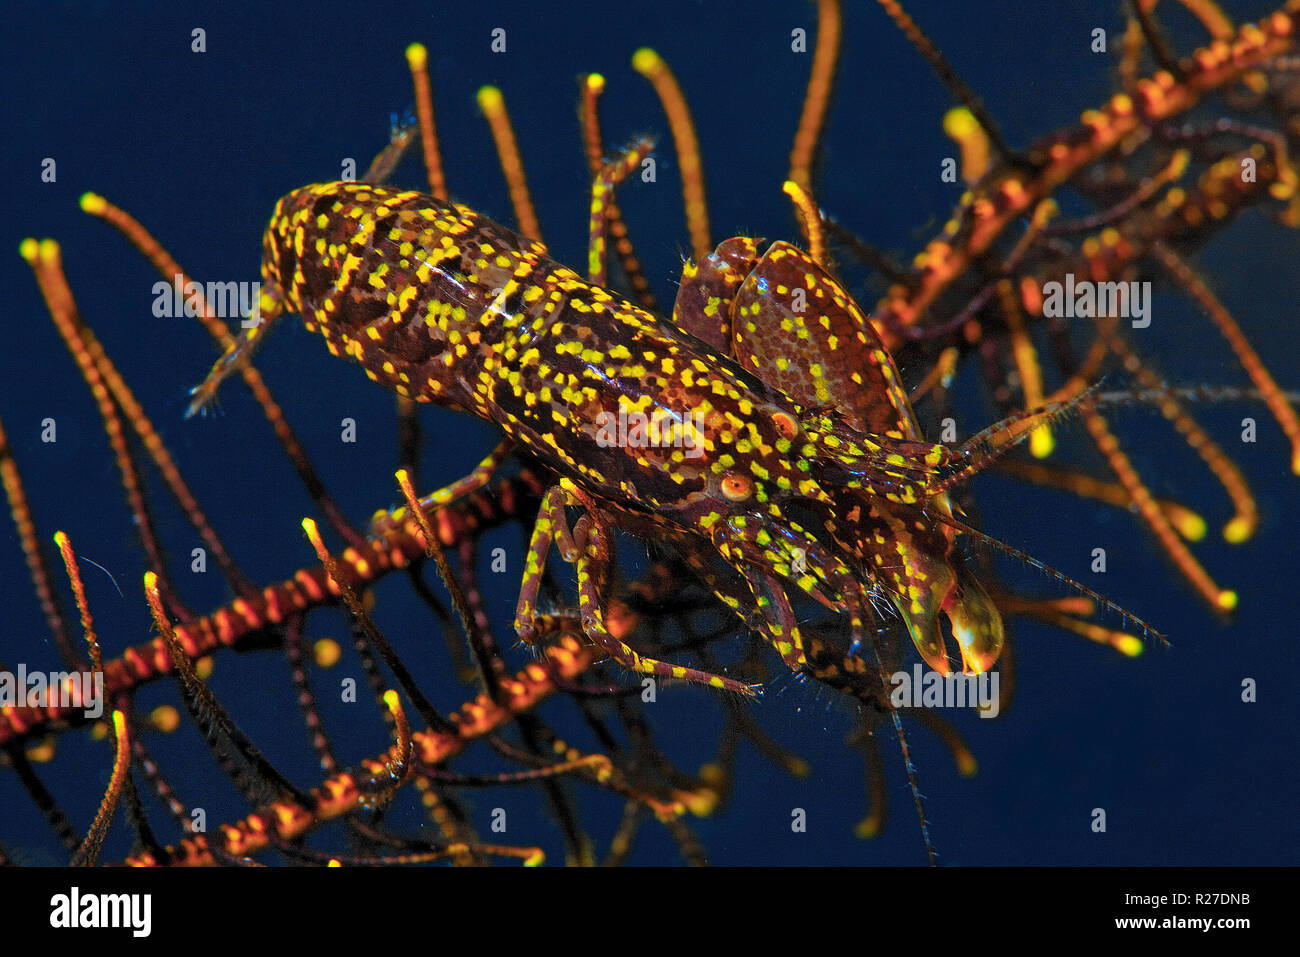 Stimpson's Snapping Shrimp (Synalpheus stimpsoni), inhabits only the central disc of crinoids  (Comanthus sp.), Halmahera, Moluccas Sea, Indonesia Stock Photo